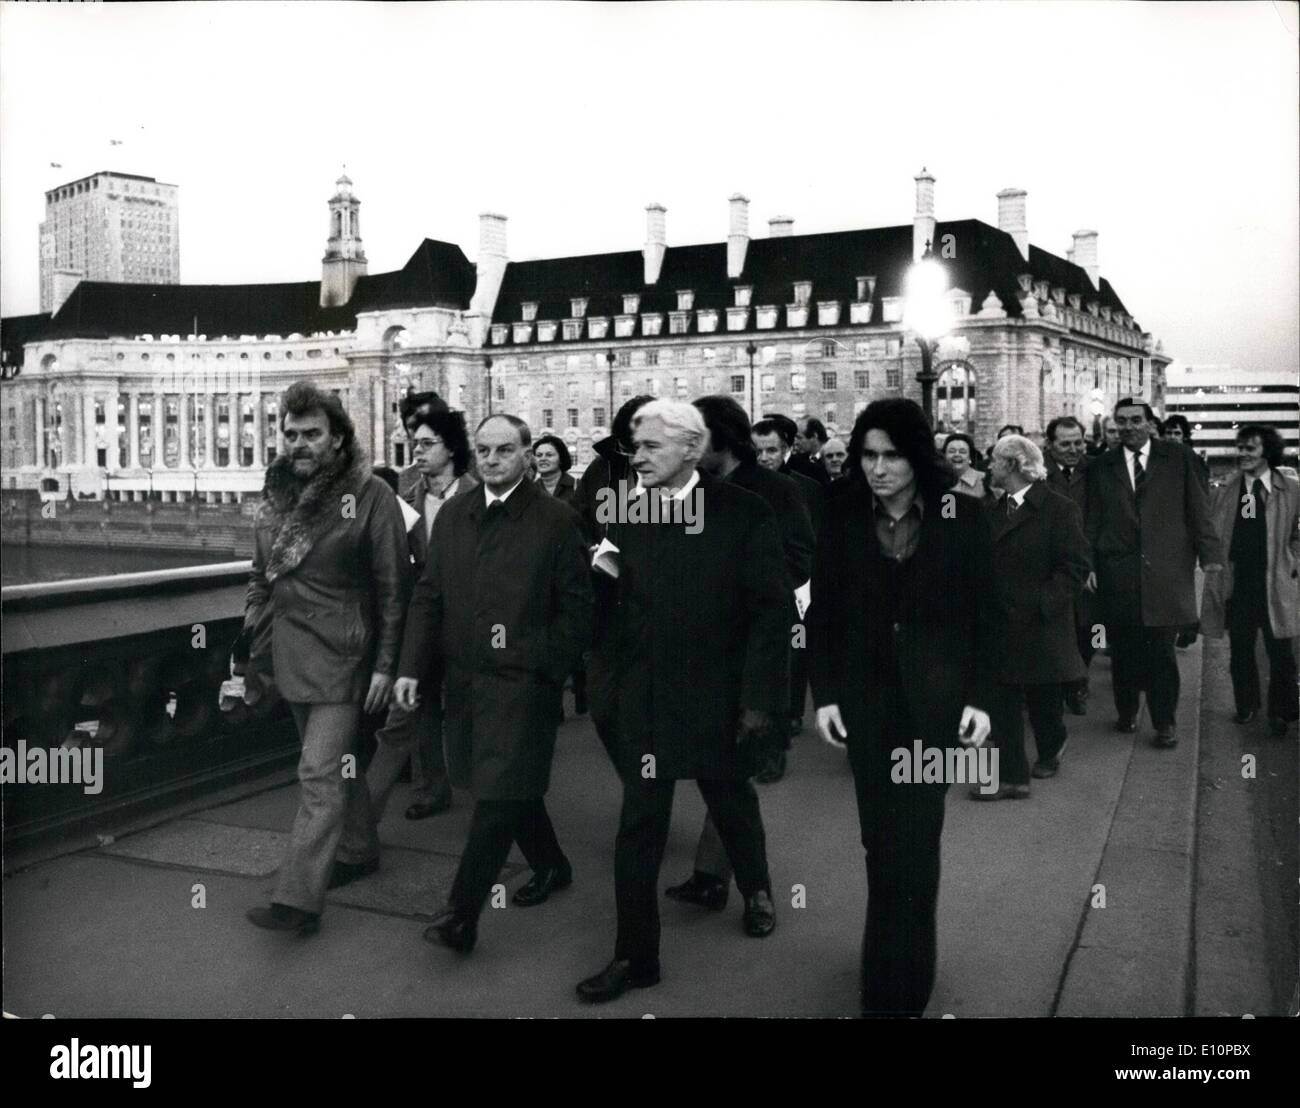 Nov. 11, 1973 - GLC Leader stages a Mass Lobby of M.P.s Following the Crisis Hitting London's Public Services: GLC Labour London Leader Sir Reg Goodwin halted the Greater London Council's meeting today and led his followers across Westminster Bridge to the House of Commons for a mass Lobby of M.P.s. His action was sparked off by the crisis hitting London's public Services. Picture shows: Against the background of the GLC headquarters at county Hall, Sir Reg Goodwin (second from left ) leads his followers across Westminster Bridge on their way to the house of Commons this evening. Stock Photo